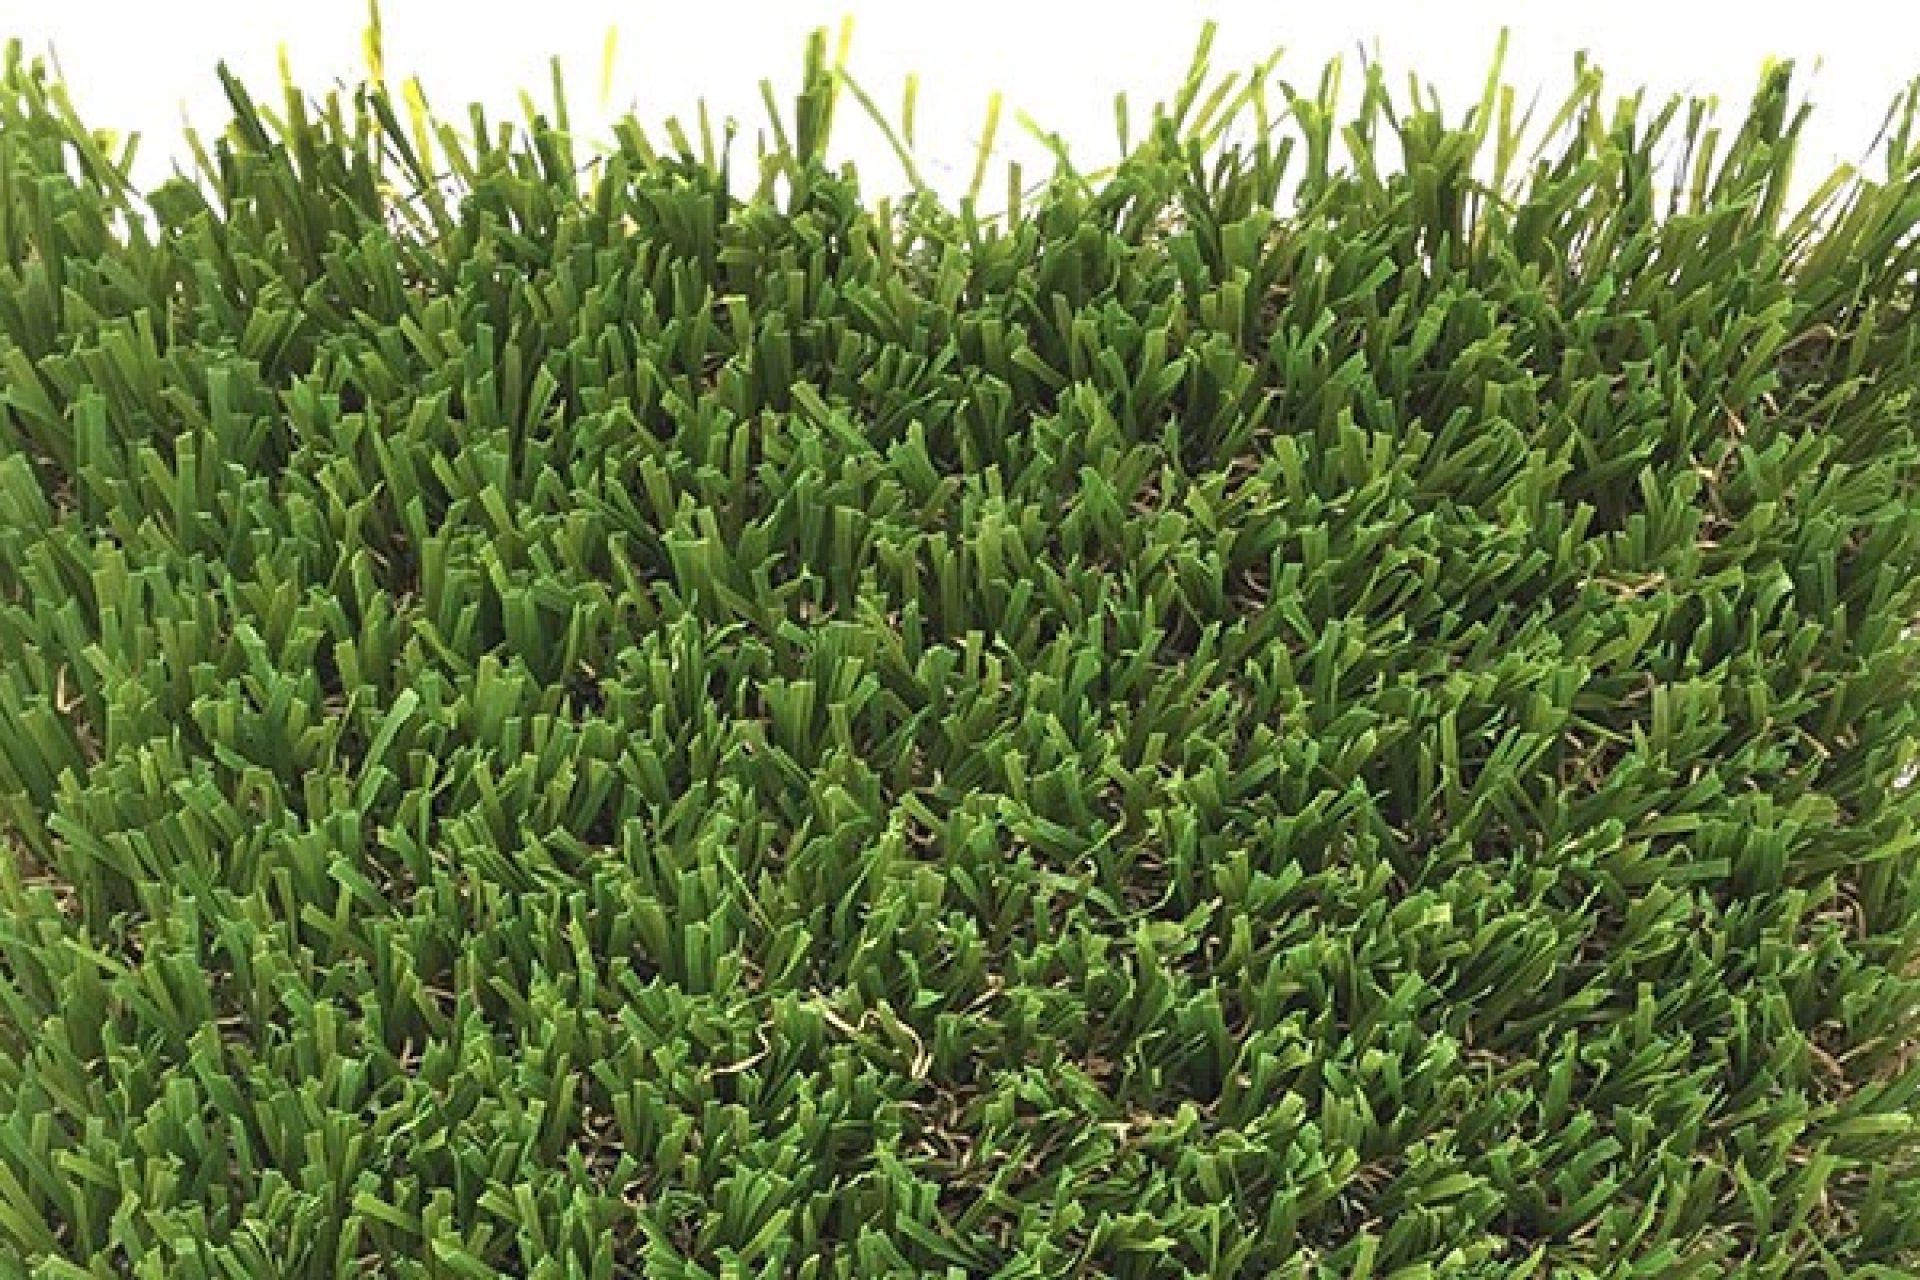 With the rising popularity of pet applications, Bella Turf has created a grass that is aesthetically pleasing for you, and functionally practical for them.